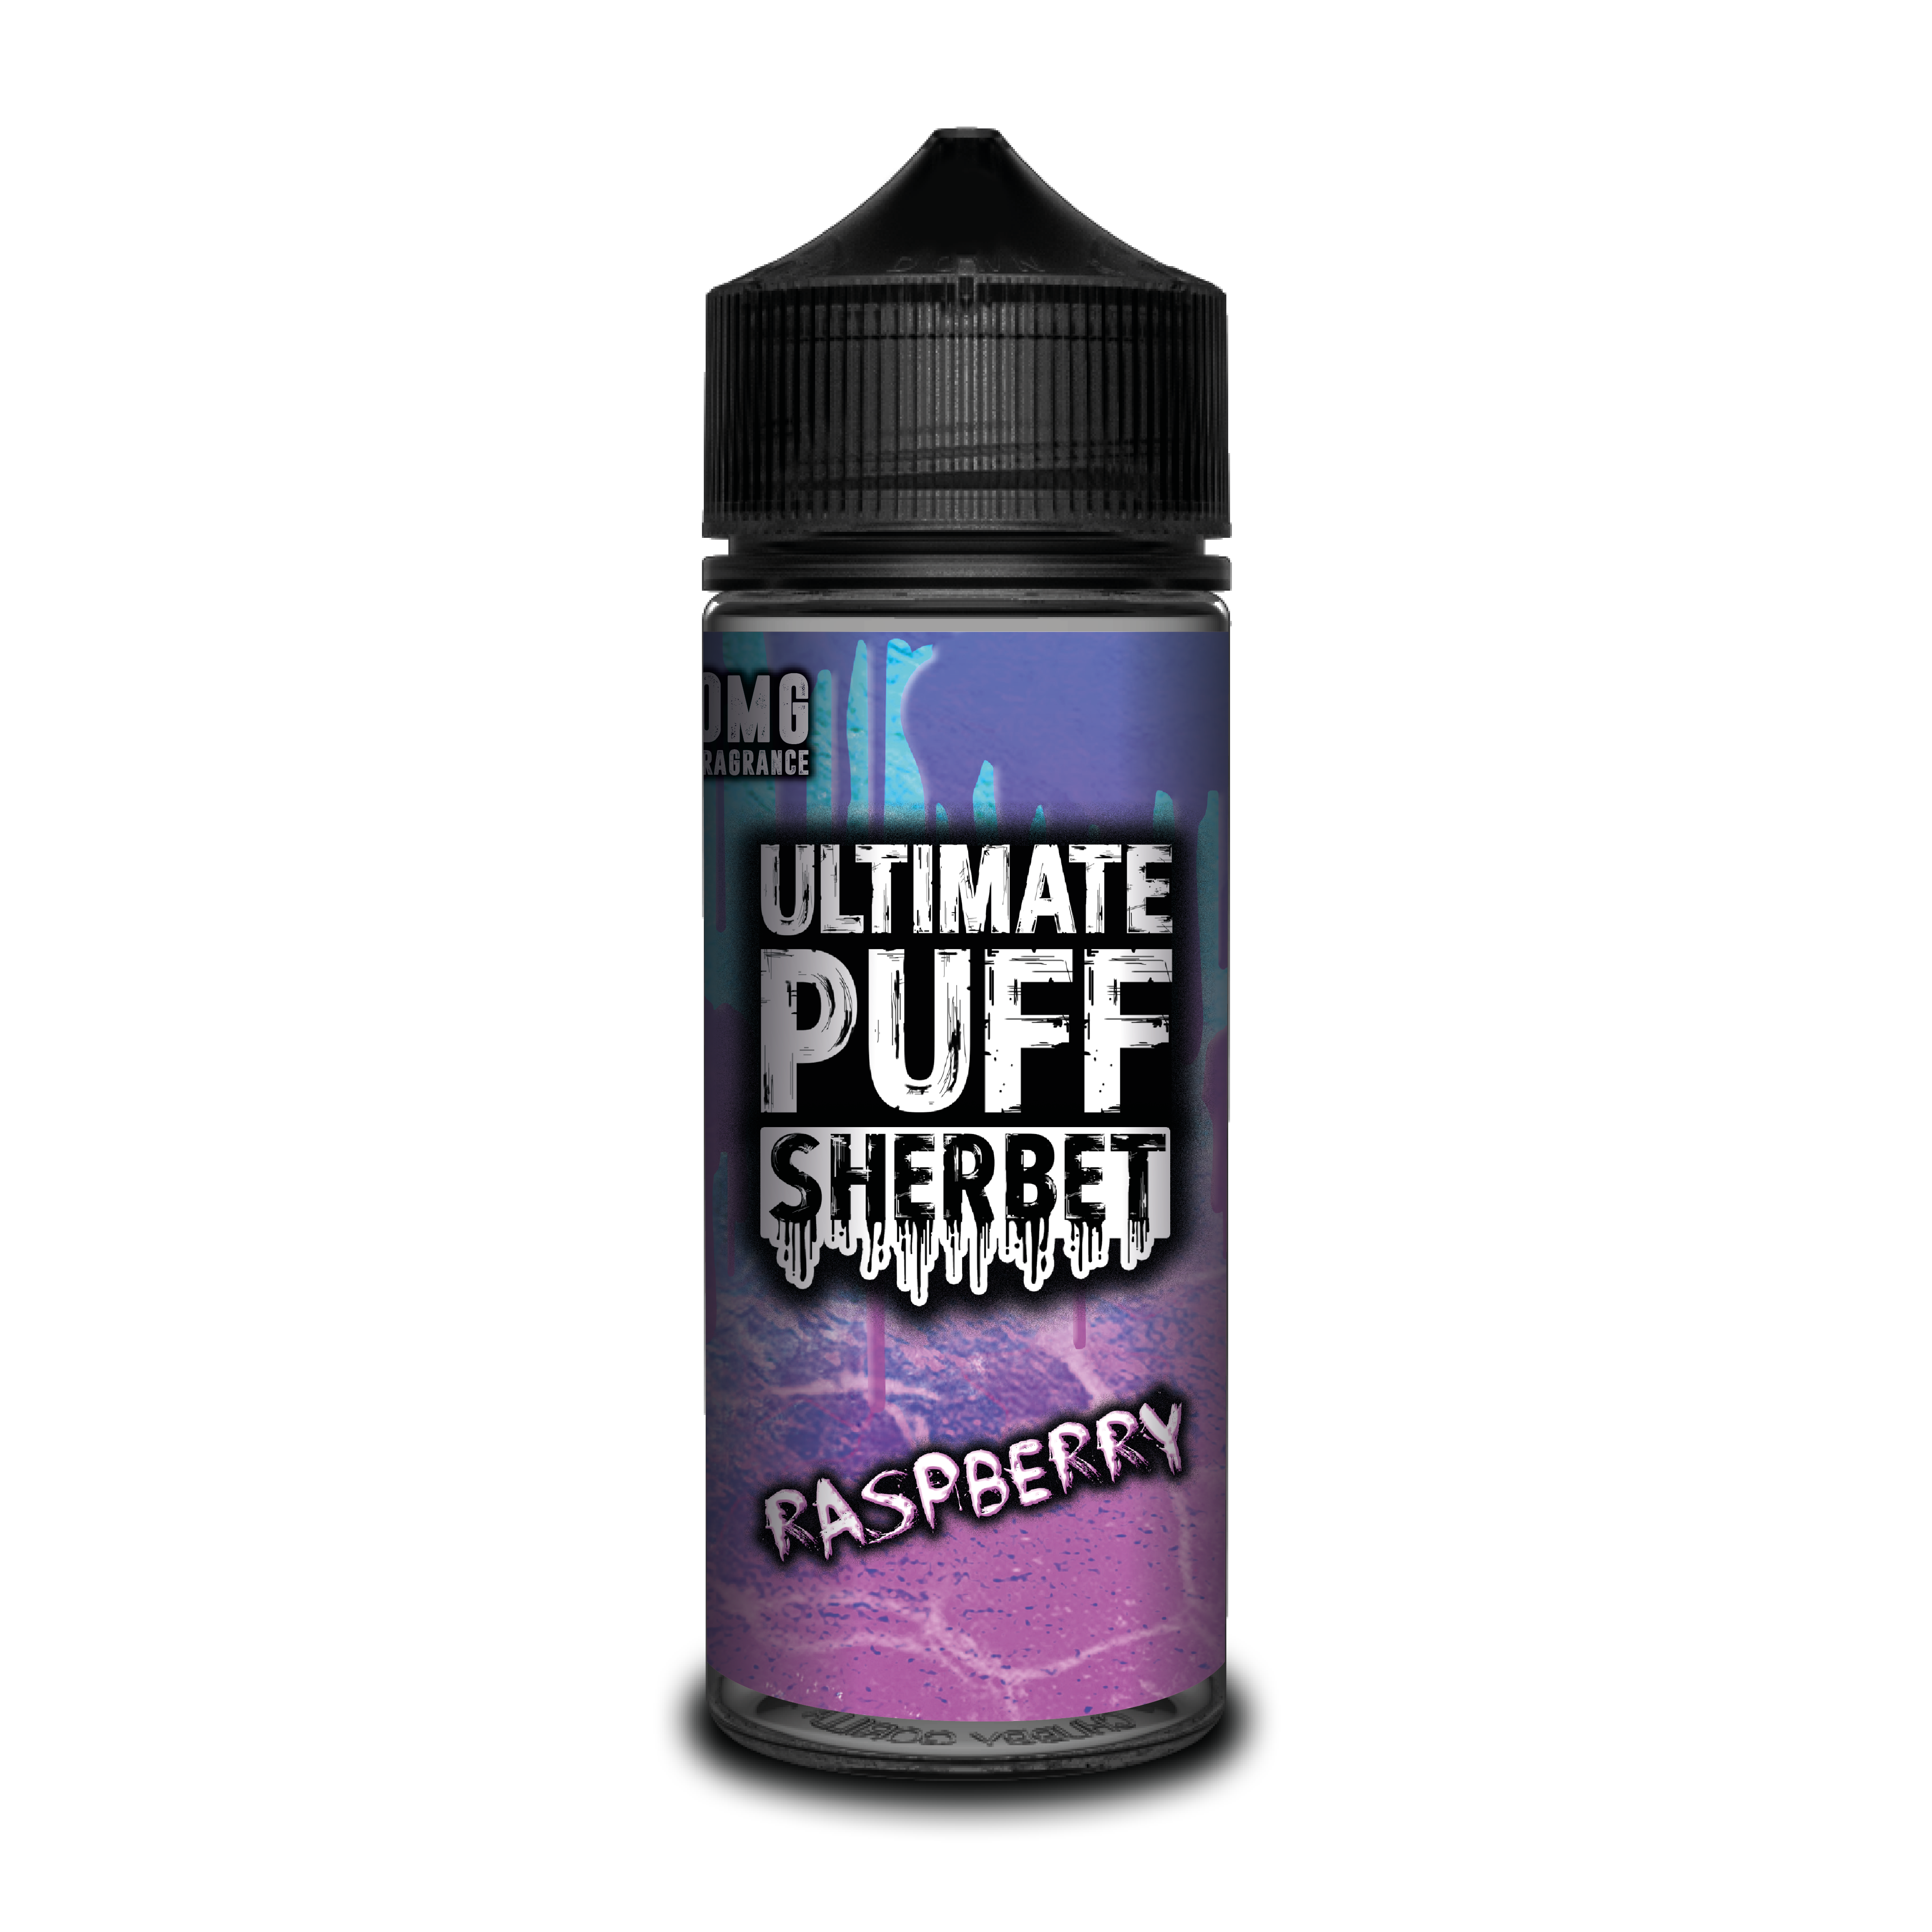 Raspberry Sherbet Shortfill by Ultimate Puff